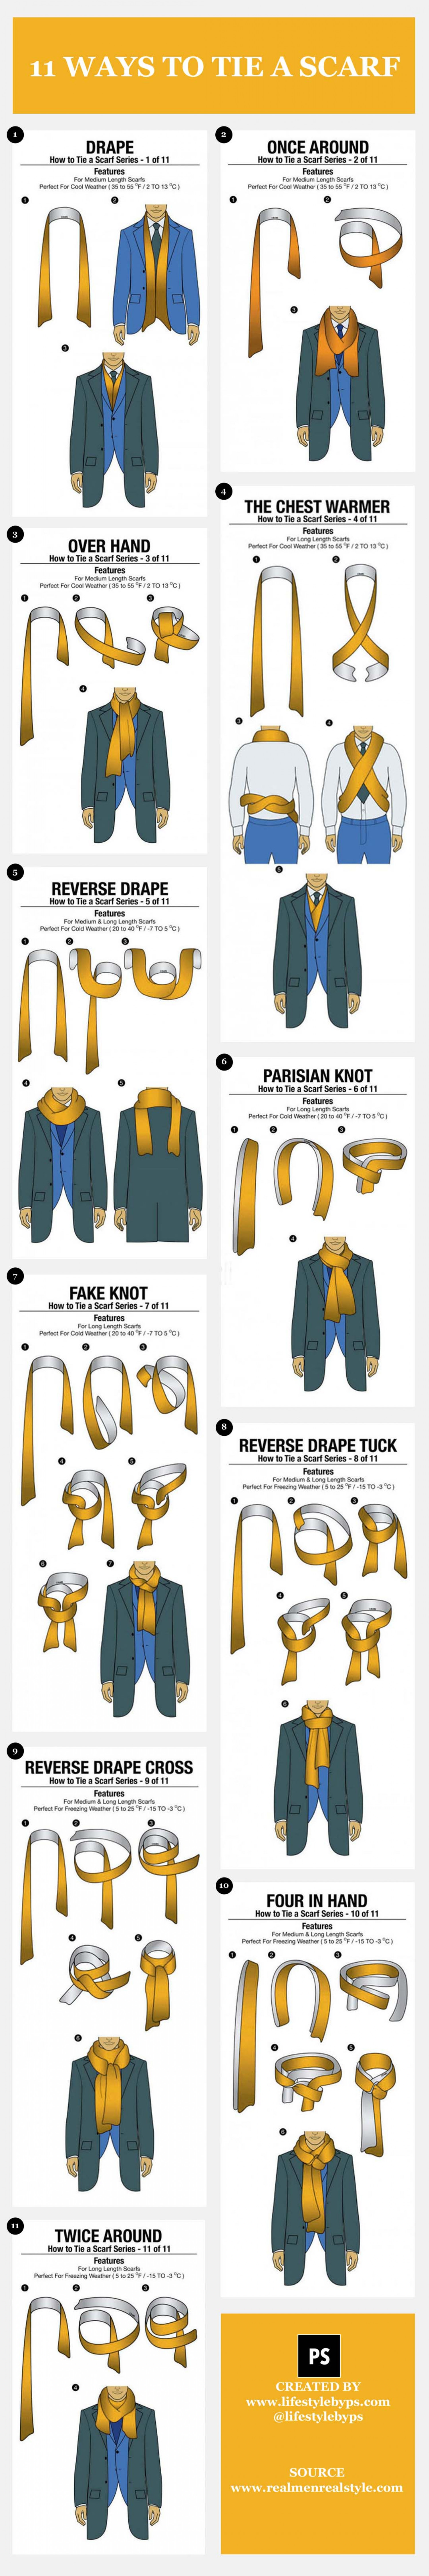 How To Infographic: 11 Simple Ways to Tie a Scarf